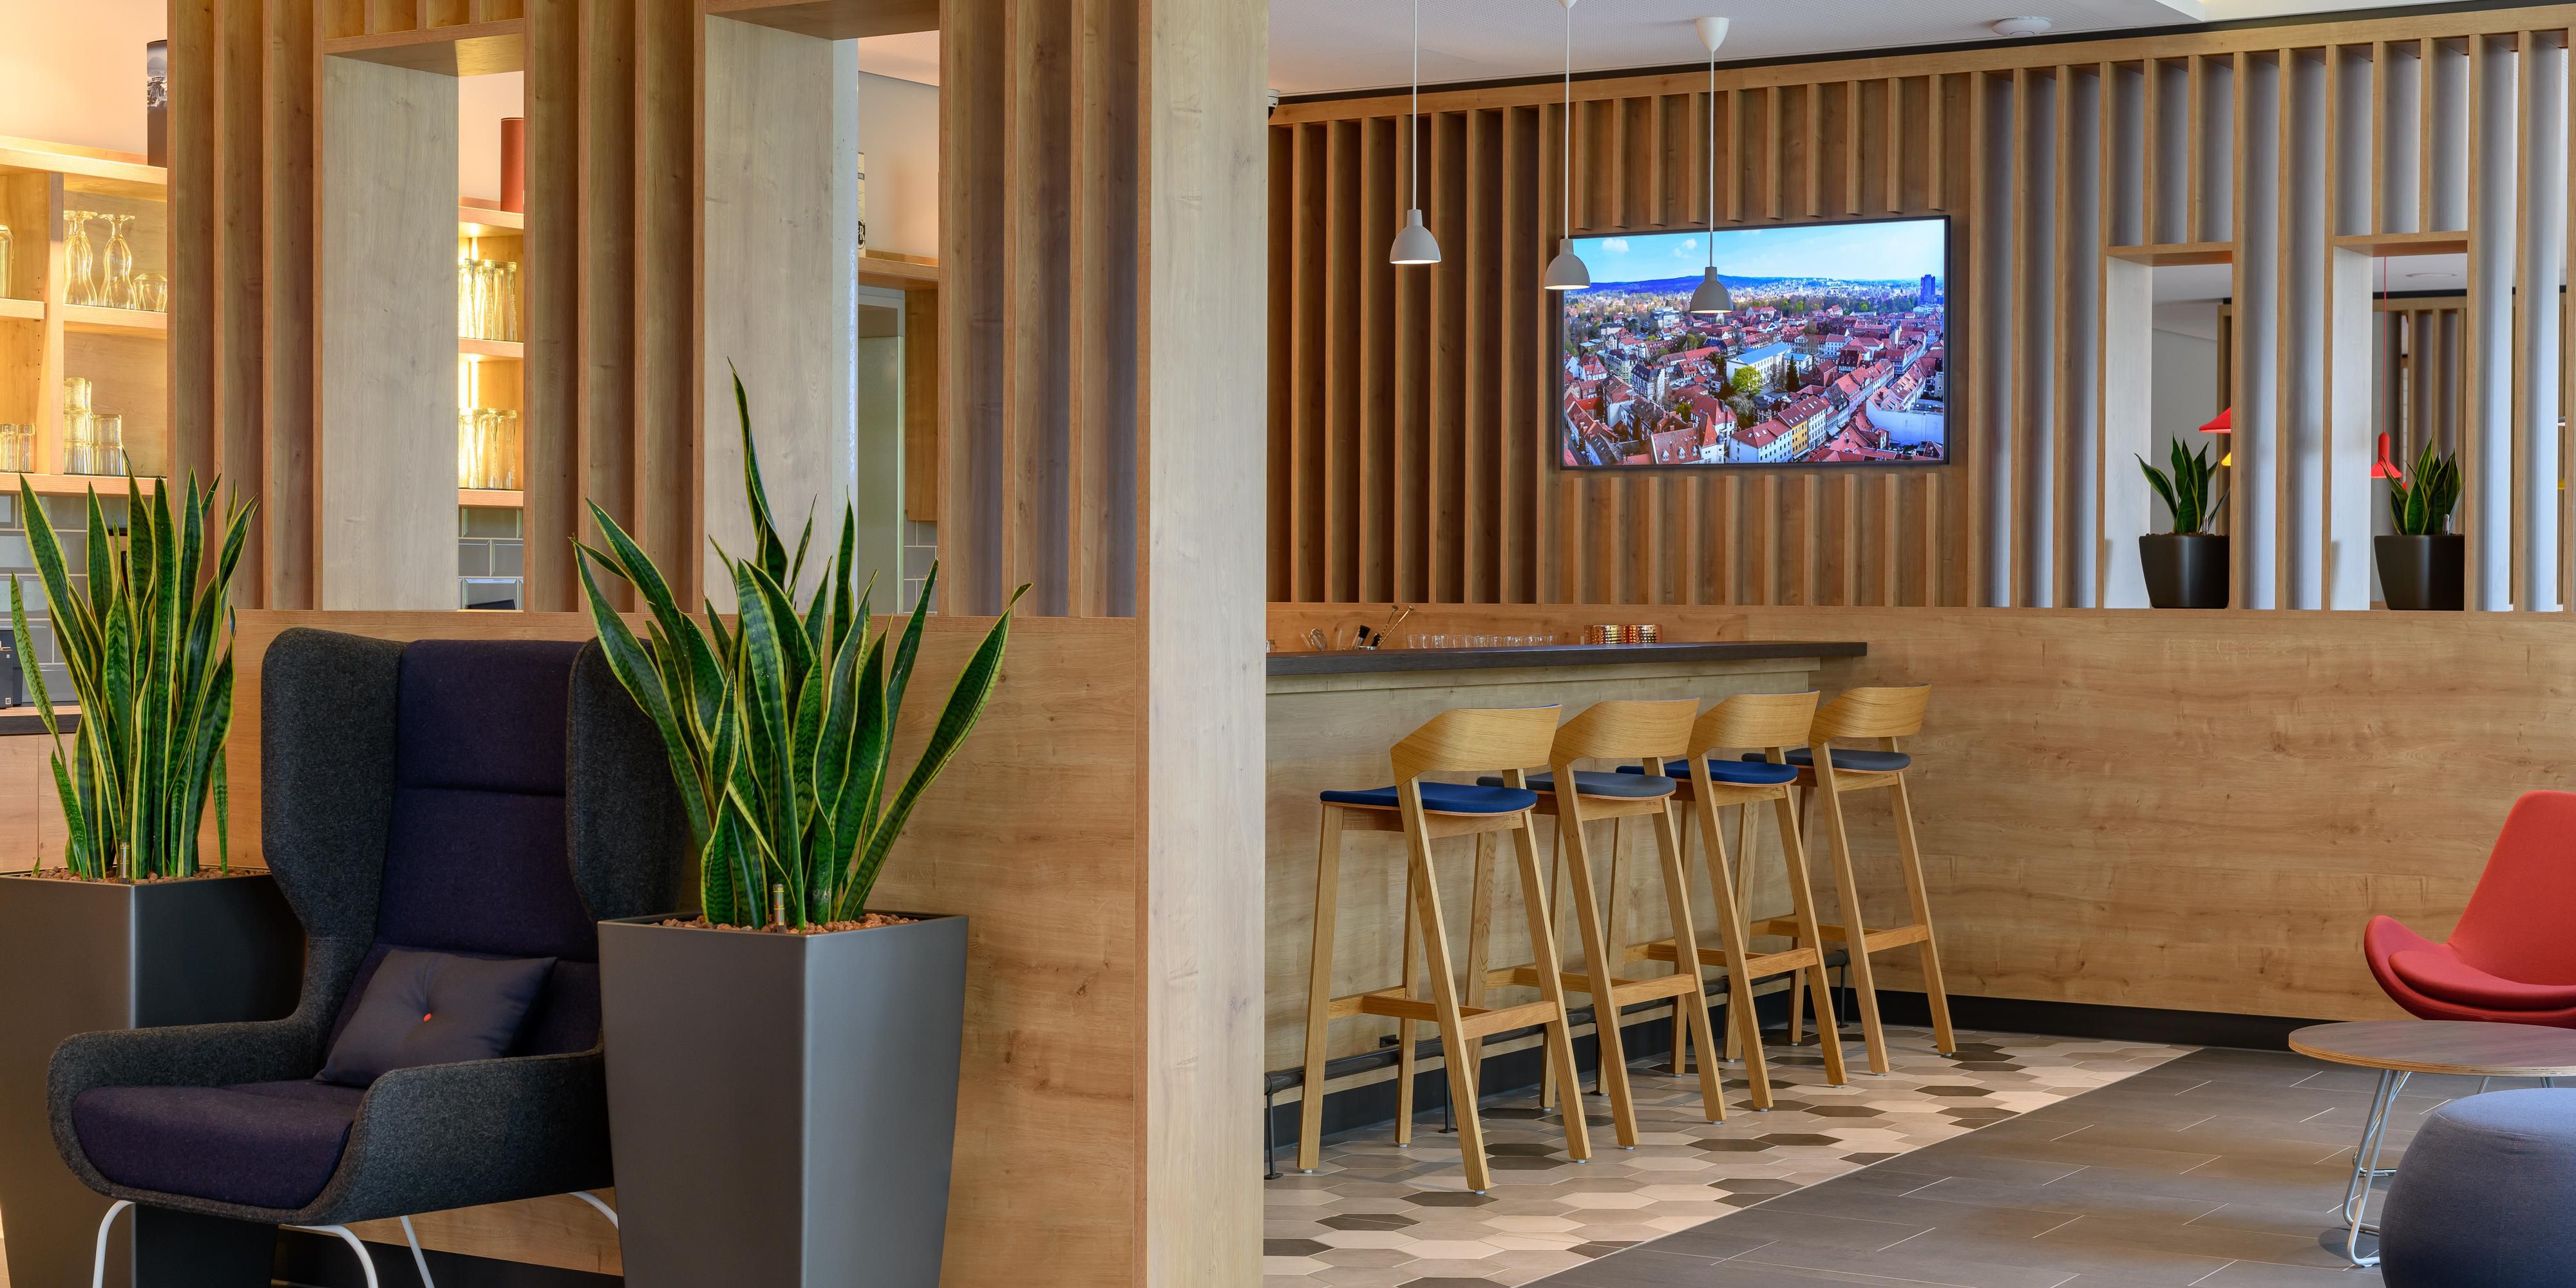 Our hotel bar is a relaxed meeting place for a friendly get-together. Enjoy a refreshing soft drink, a freshly brewed coffee, a cool beer or a fruity cocktail in our bar in the Holiday Inn Express Göttingen.